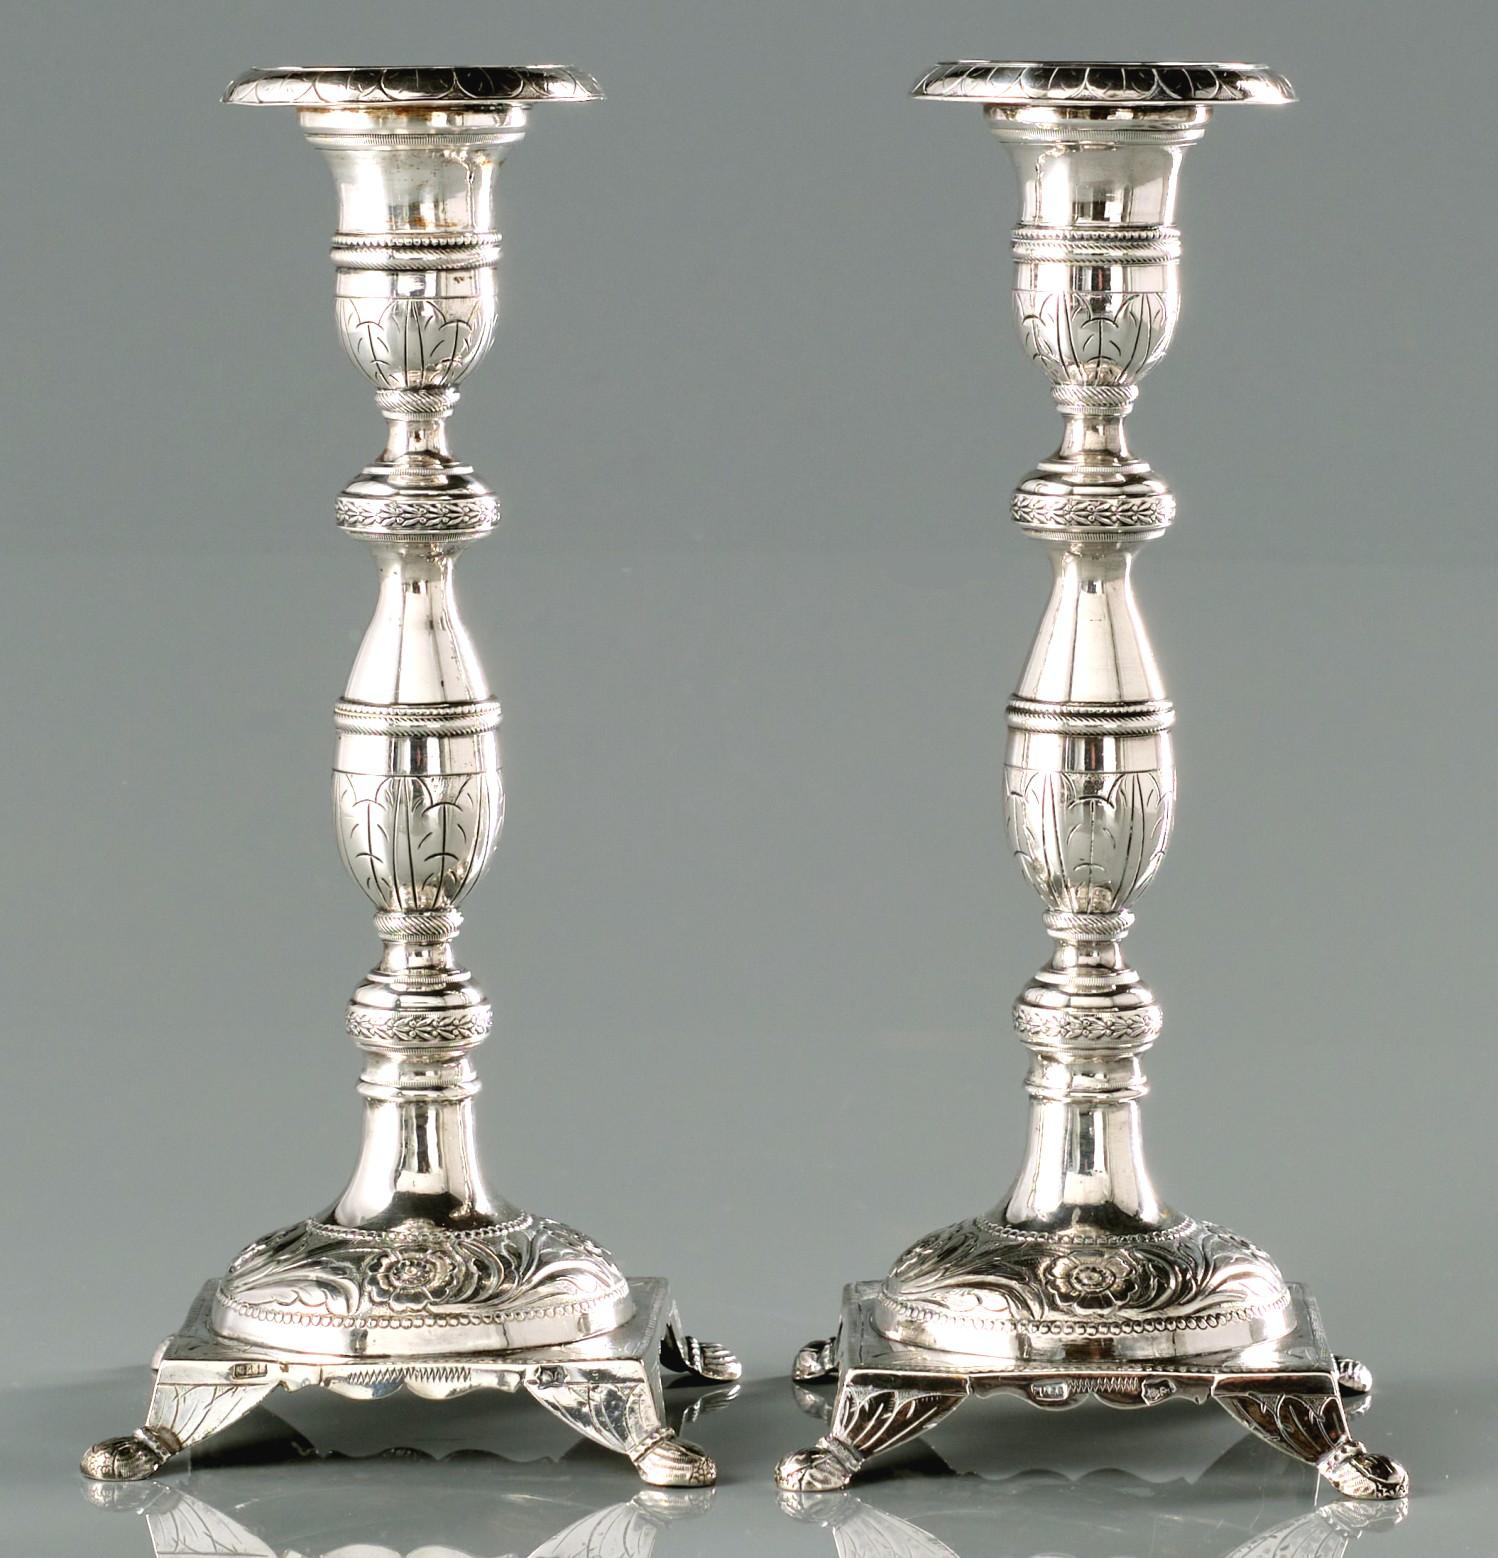 A very good & heavy pair of mid 19th century Portuguese silver (.833 fine) cast Shabbat candlesticks. 
Both showing baluster shaped stems rising from convex mounds decorated with embossed foliate motifs, to urn shaped nozzles with flaring drip